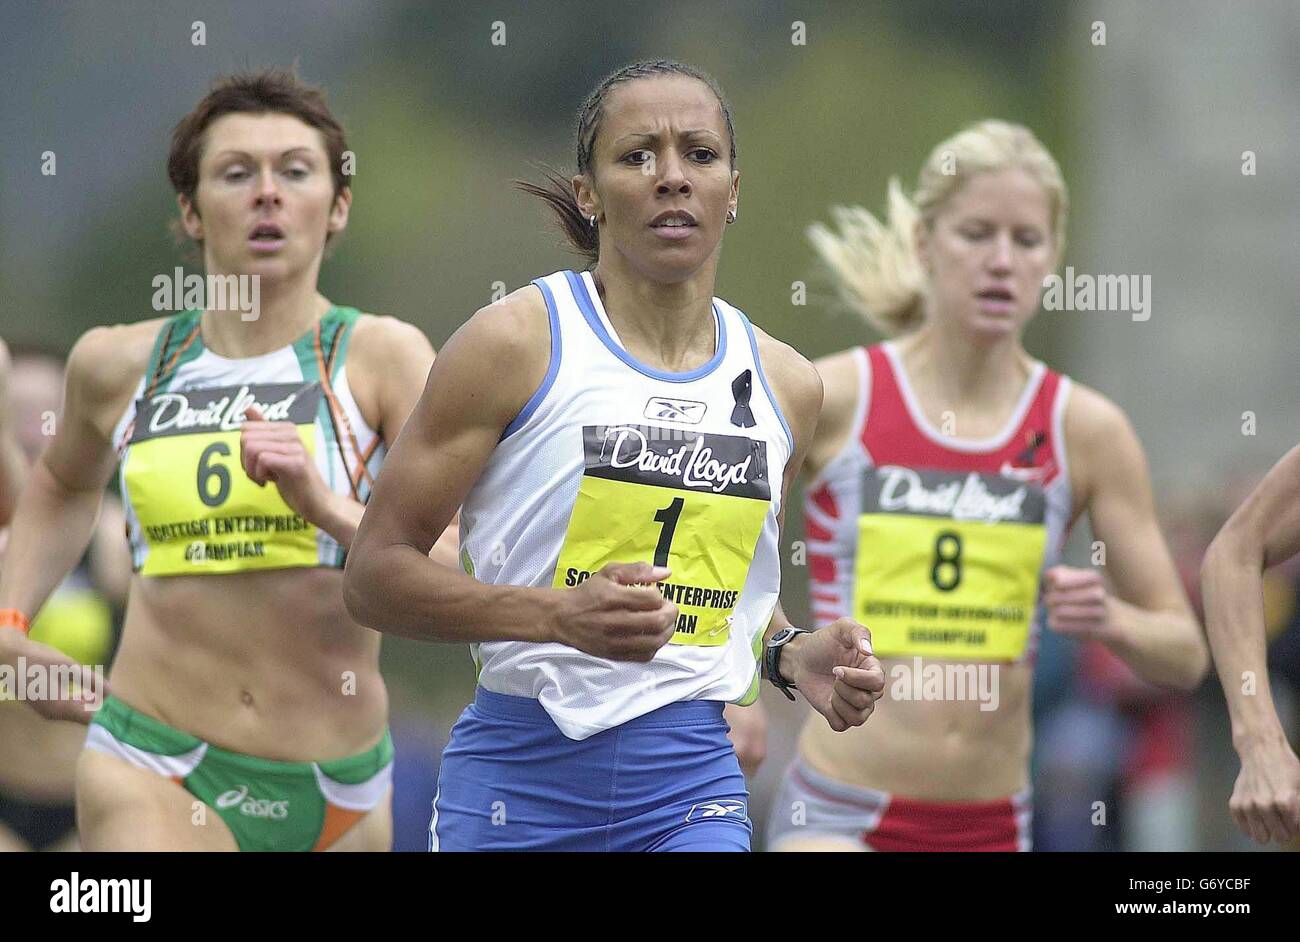 Balmoral Women's Mile Road Race. Britain's Kelly Holmes (centre) on her way to victory in the Women's Mile Road Race at Balmoral. Stock Photo